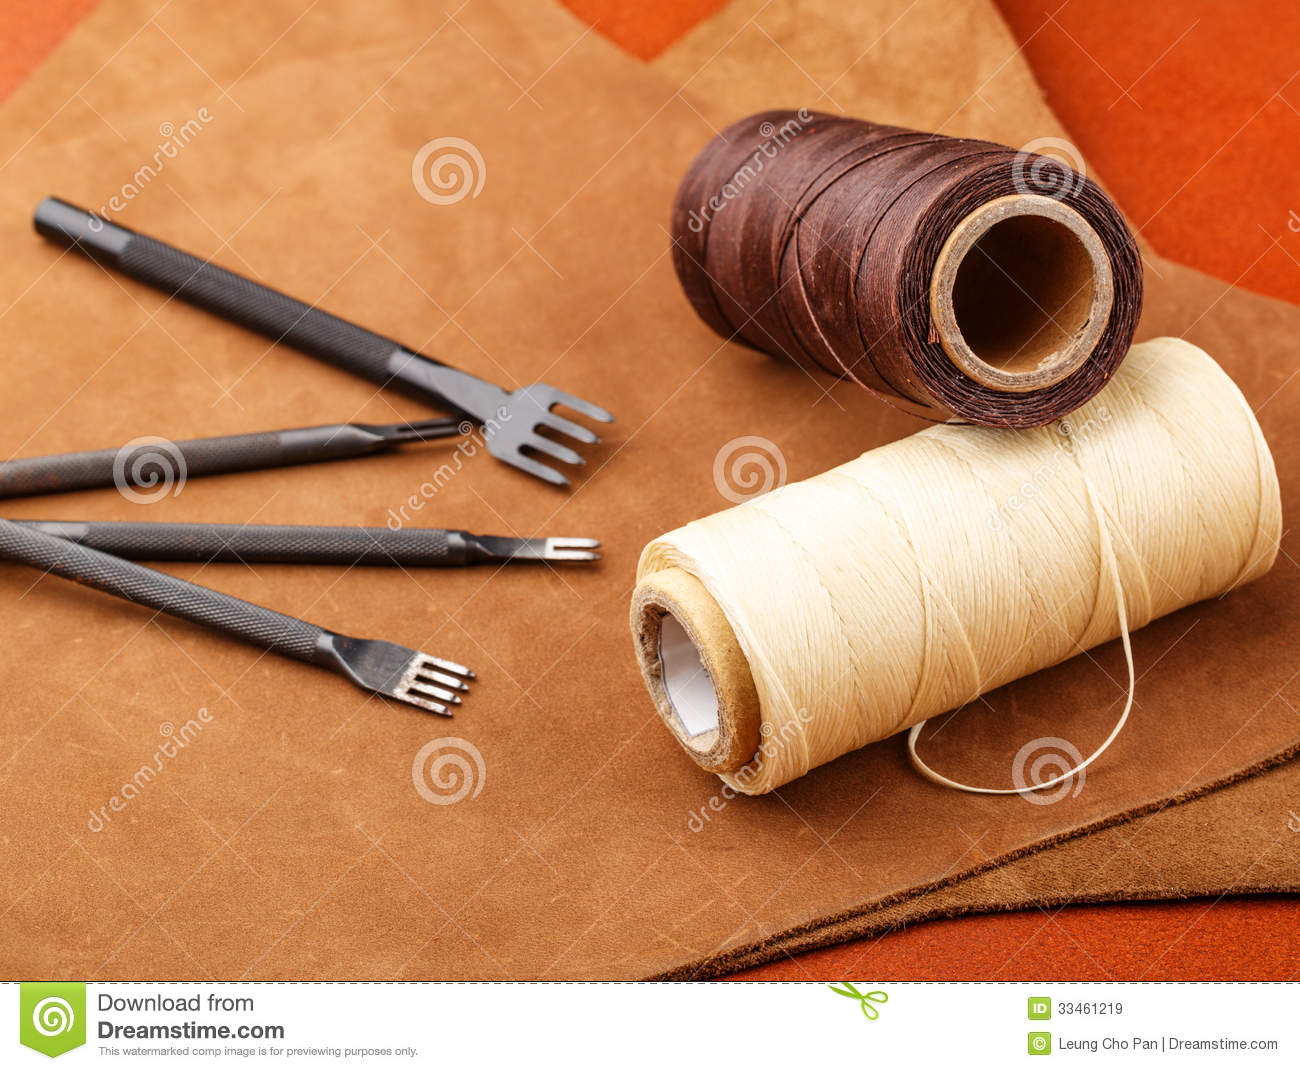 Leather Craft Tool Royalty Free Stock Images   Image  33461219